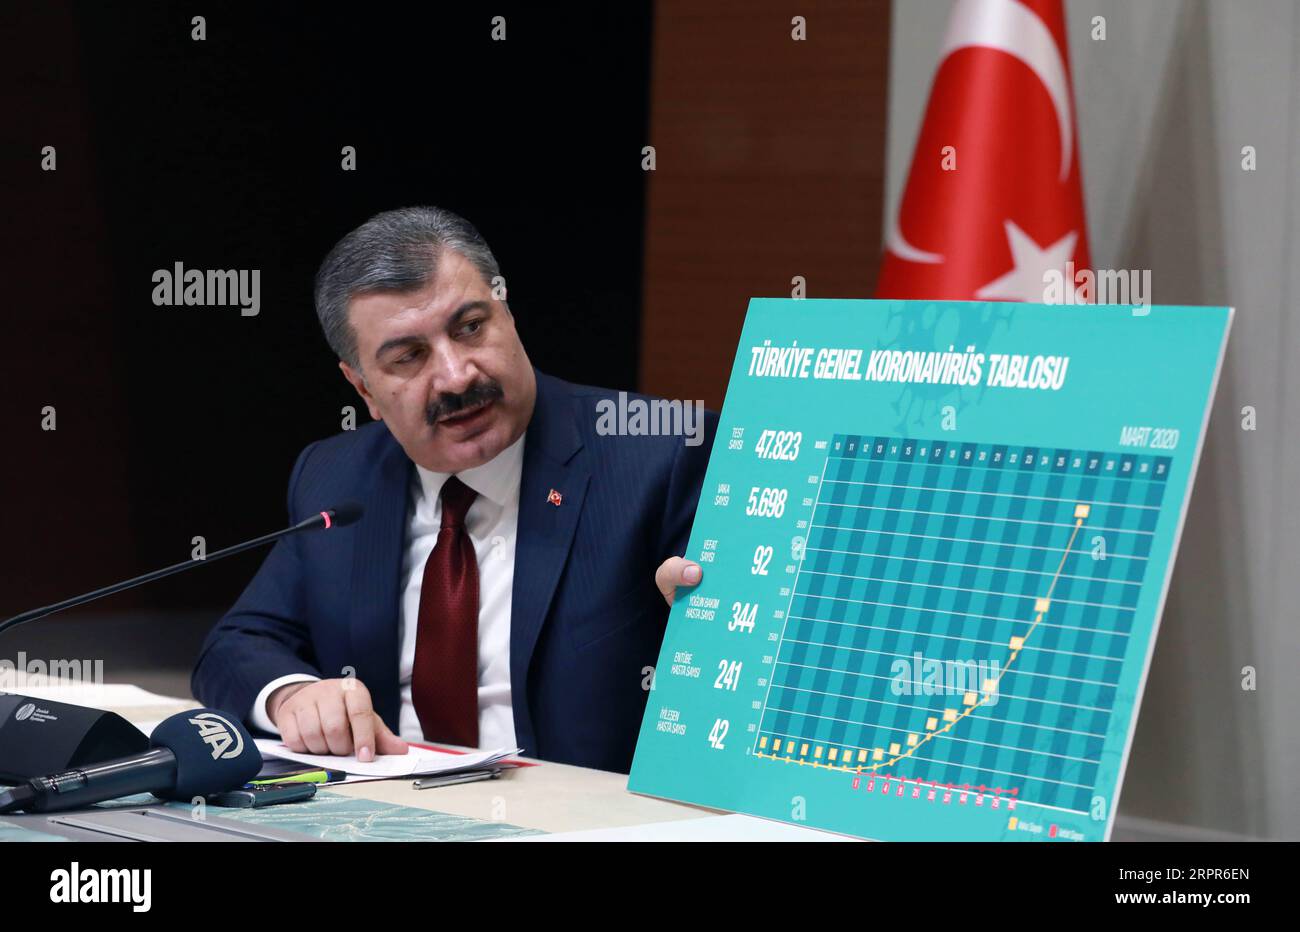 200327 -- ANKARA, March 27, 2020 Xinhua -- Turkish Health Minister Fahrettin Koca shows a chart at a press conference in Ankara, Turkey, on March 27, 2020. Fahrettin Koca announced 2,069 new COVID-19 cases on Friday, bringing the total number of infections to 5,698 in the country. Photo by Mustafa Kaya/Xinhua TURKEY-ANKARA-COVID-19-CASES PUBLICATIONxNOTxINxCHN Stock Photo